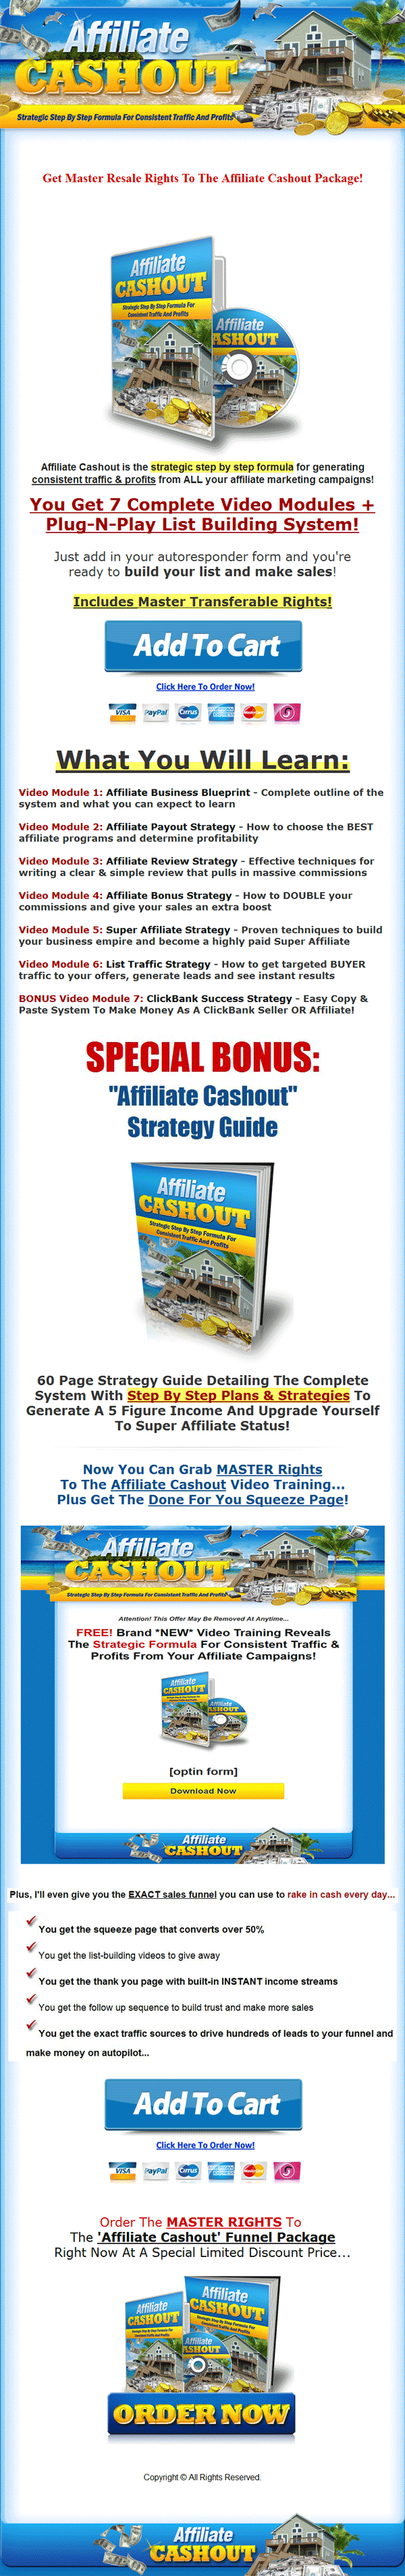 affiliate cashout ebook and videos